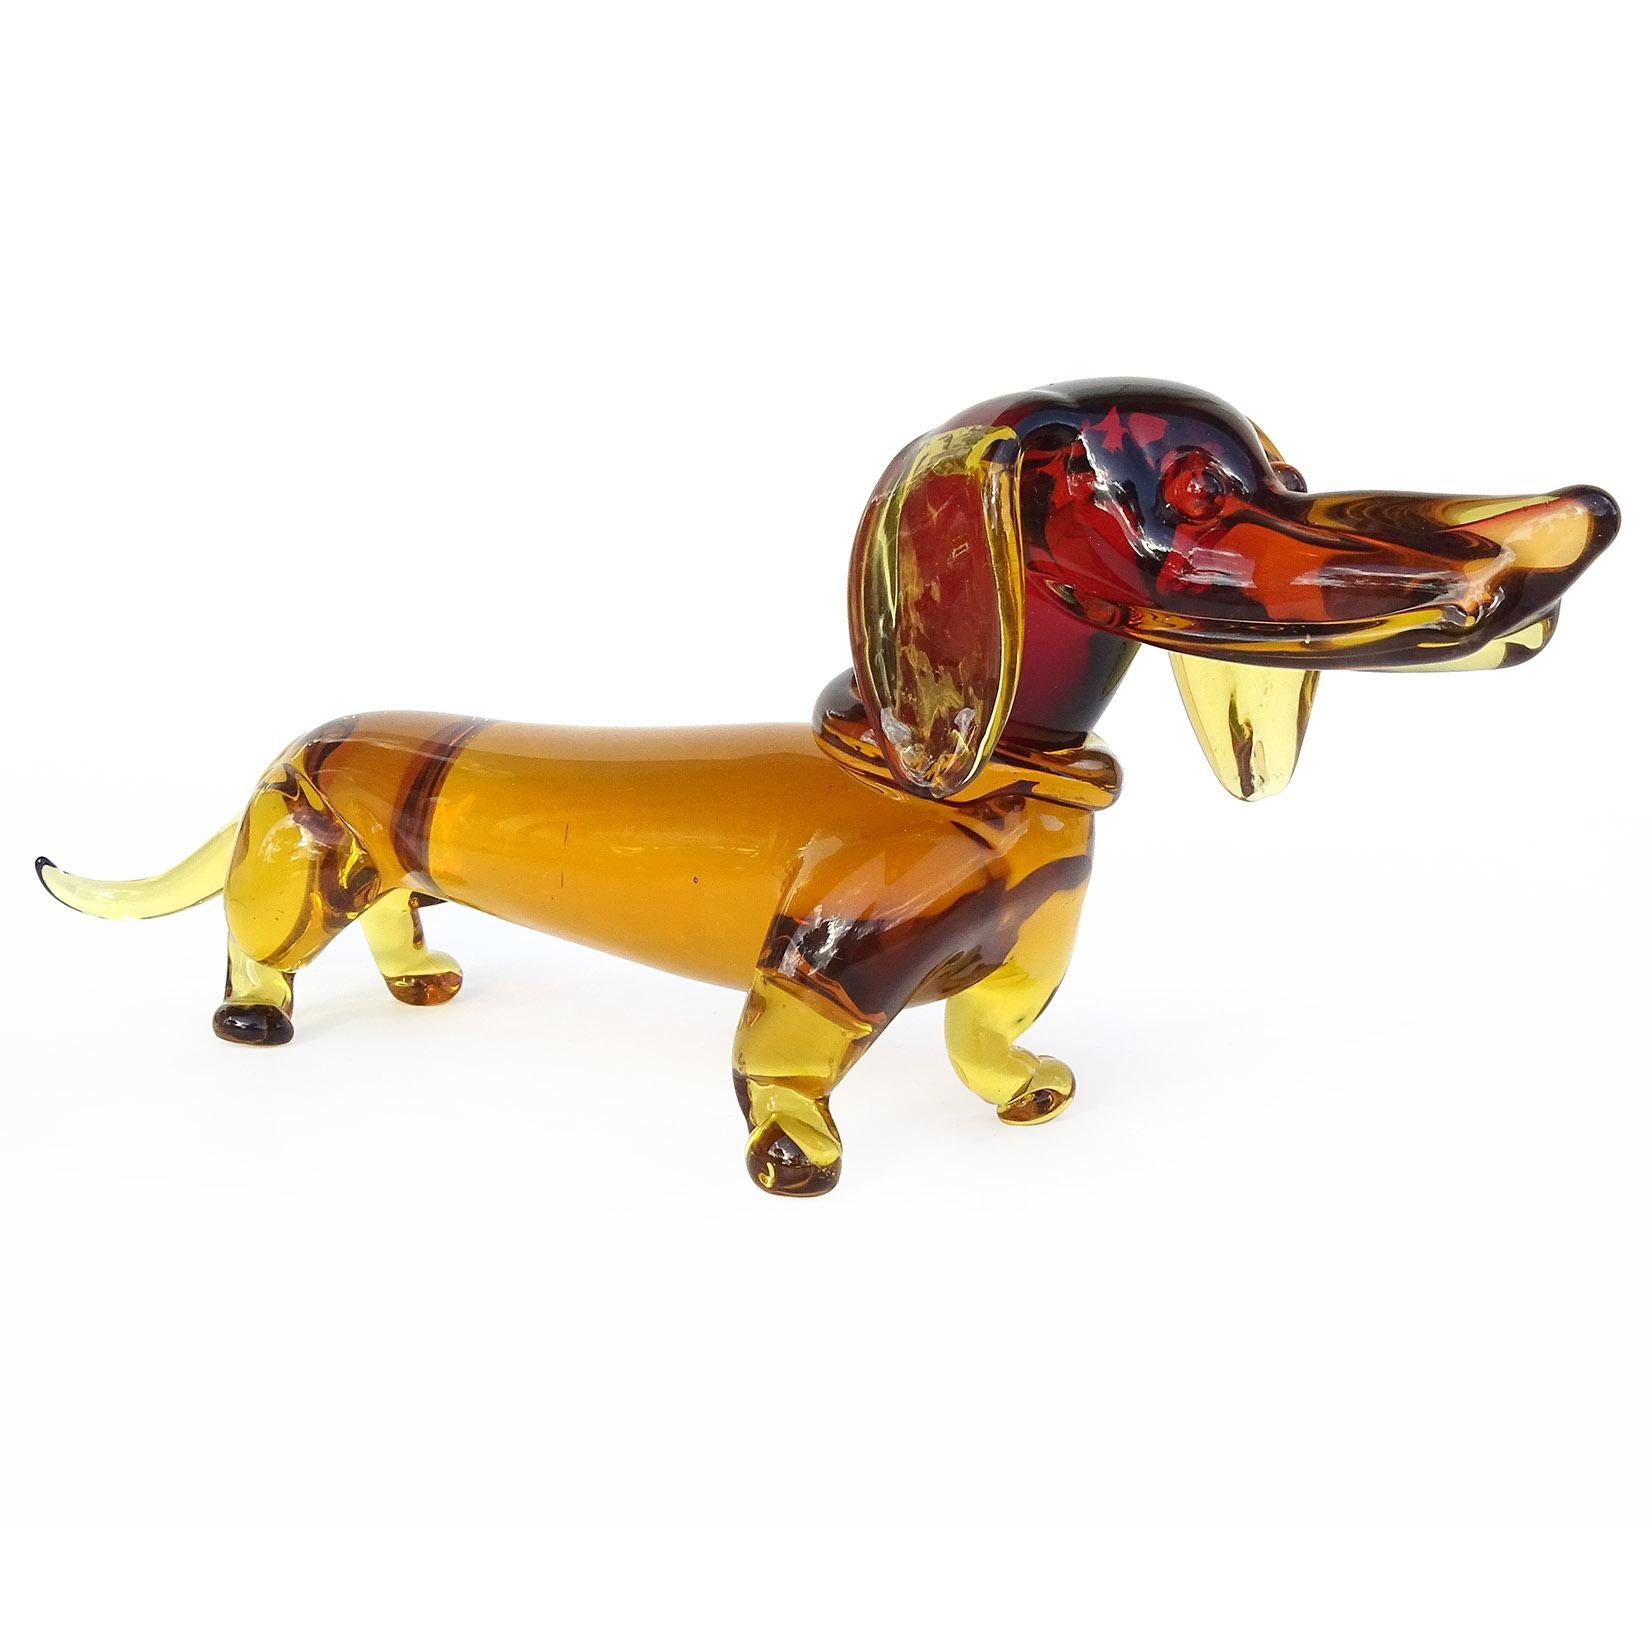 Beautiful and rare, large vintage Murano hand blown Sommerso red orange and golden honey colors Italian art glass Dachshund puppy dog sculpture. Documented to designer Archimede Seguso, with worn partial red 